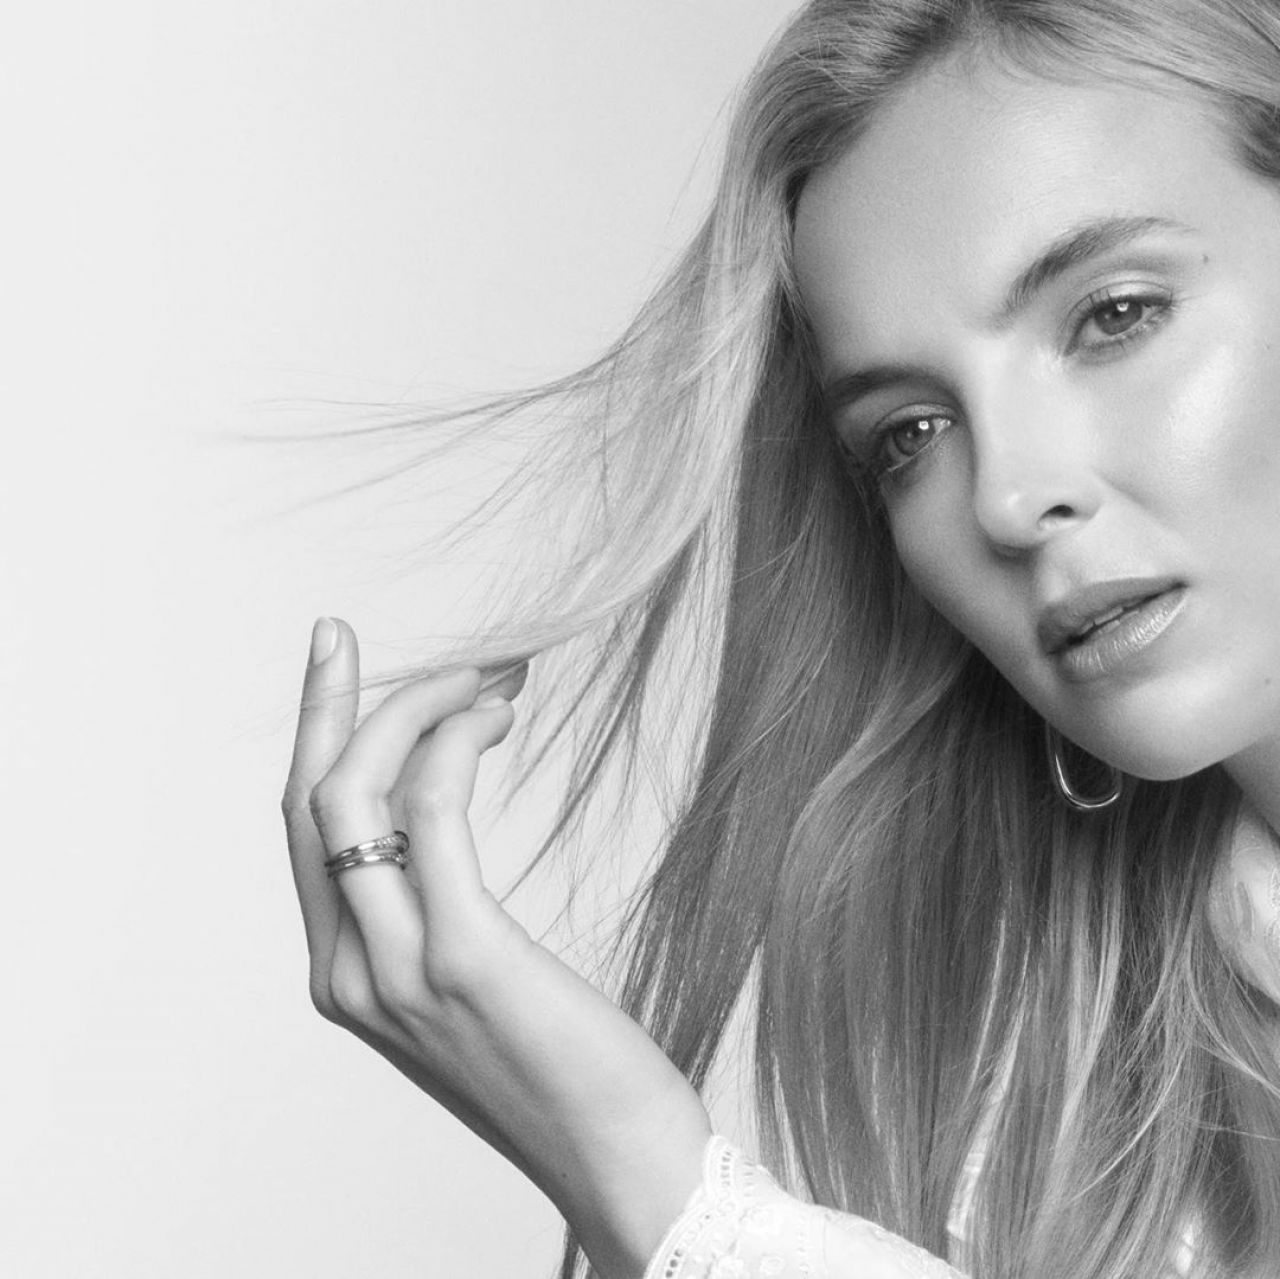 jodie-comer-the-new-face-of-skincare-brand-noble-panacea-2020-20.jpg